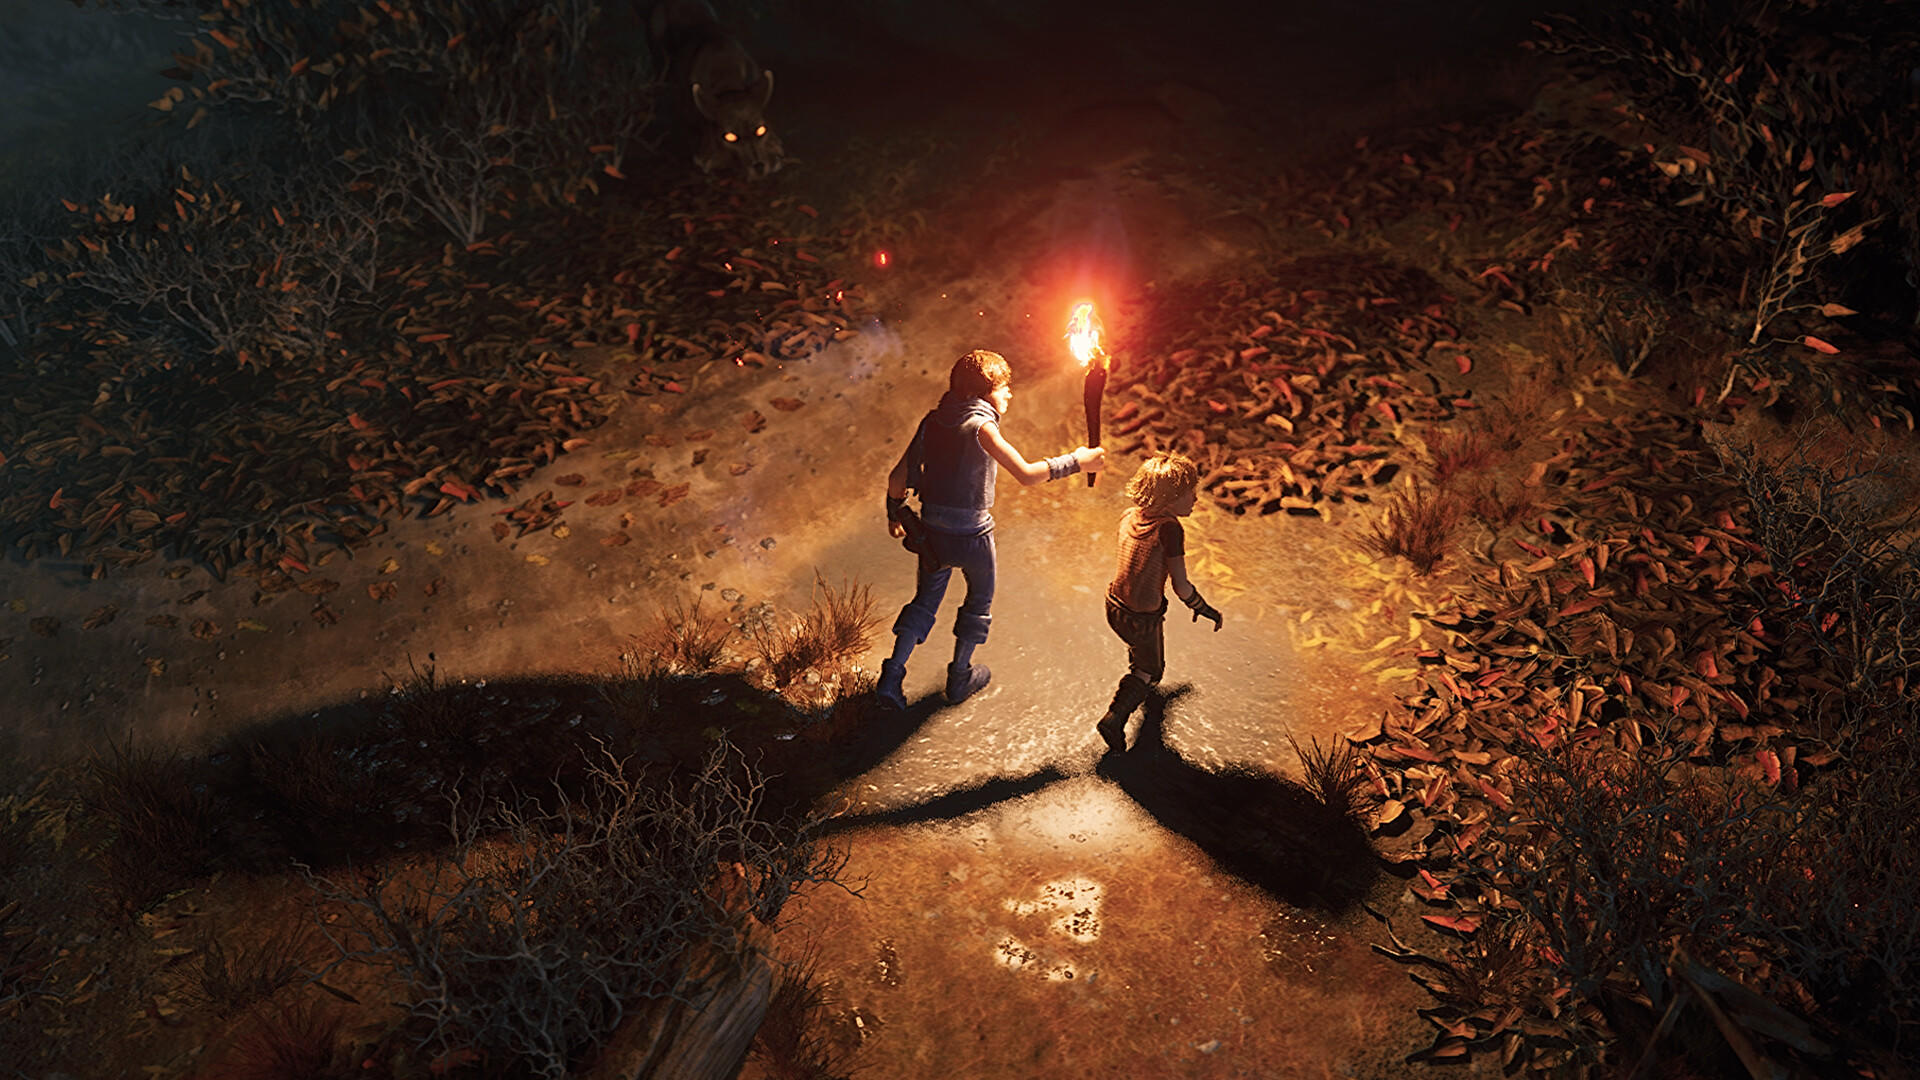 Screenshot 1 of 《兄弟：雙子傳說》重製版（Brothers: A Tale of Two Sons Remake） 